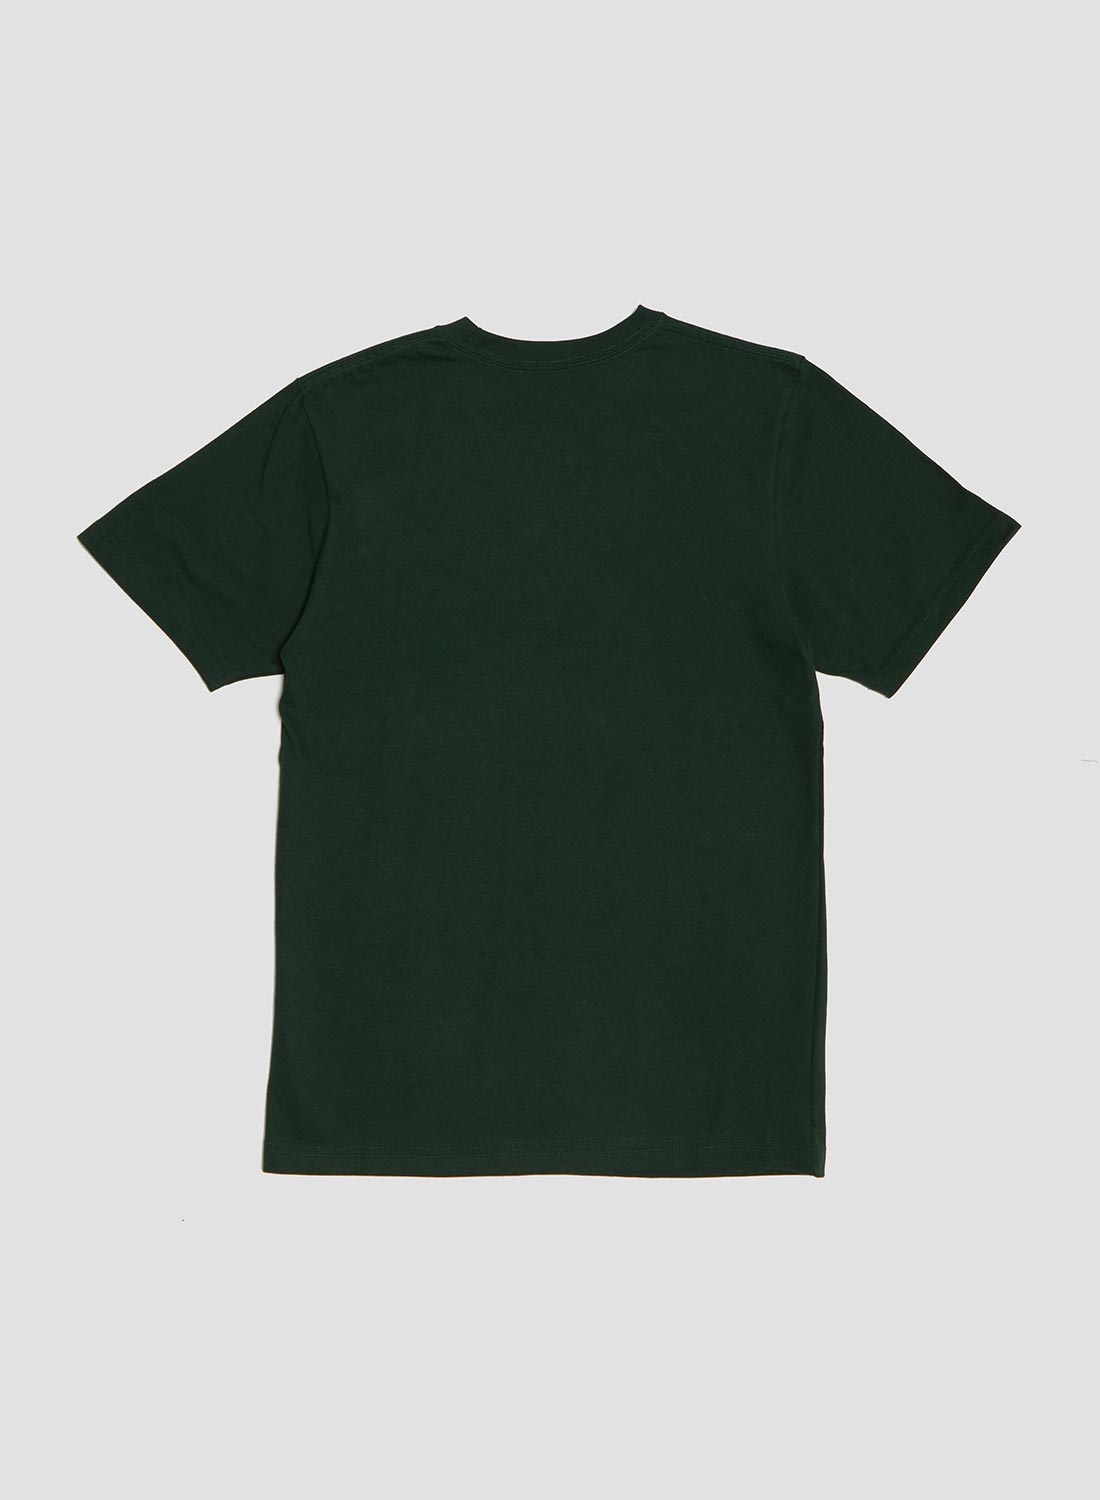 Heavy Duty Athletic T-Shirt in Forest Green - 3